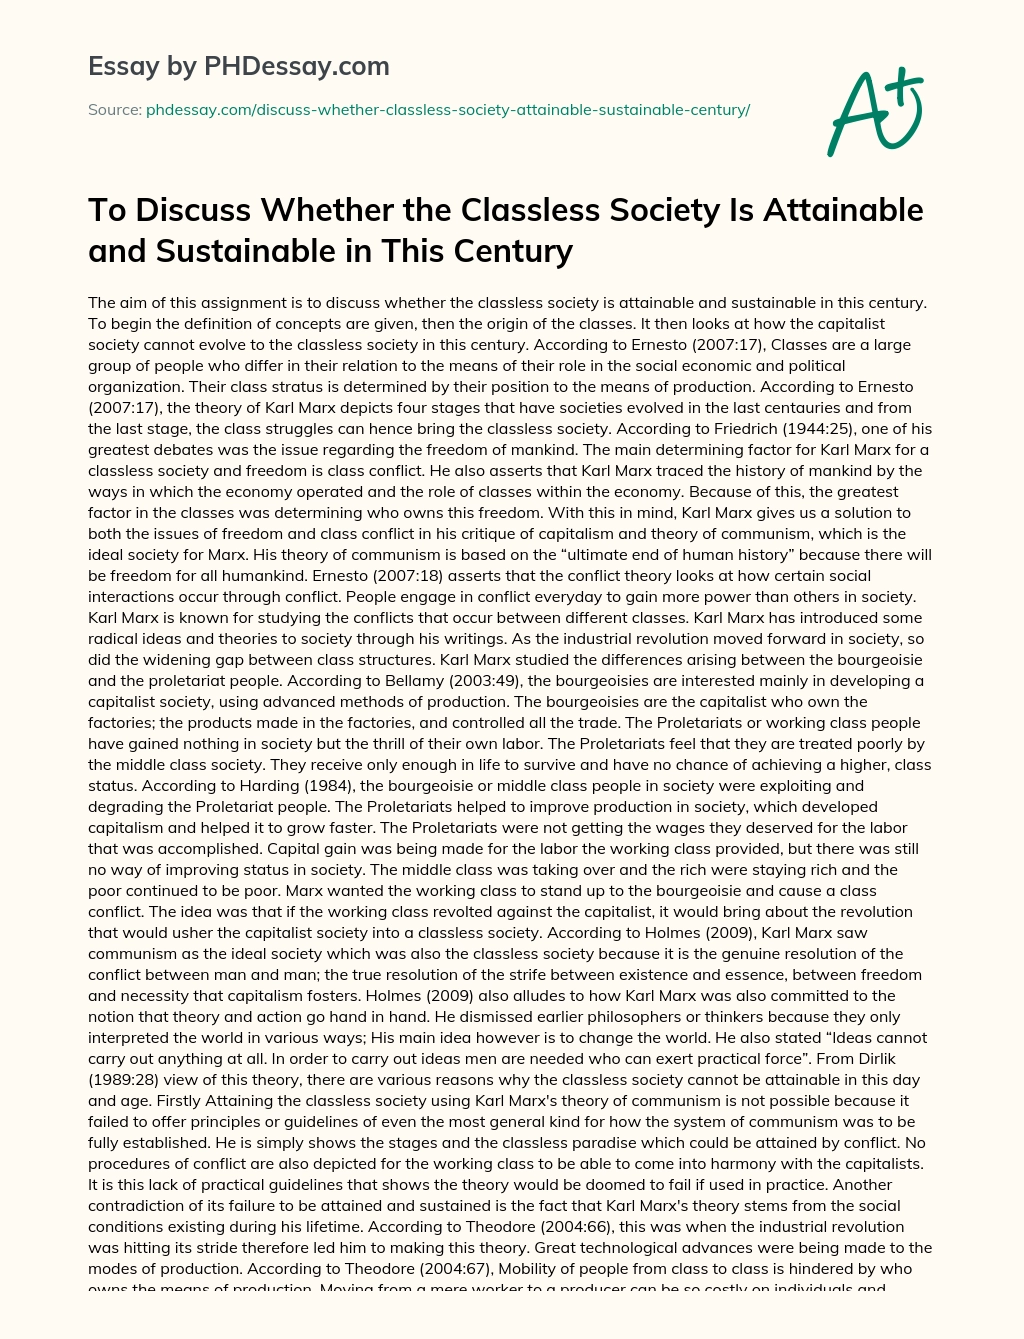 To Discuss Whether the Classless Society Is Attainable and Sustainable in This Century essay